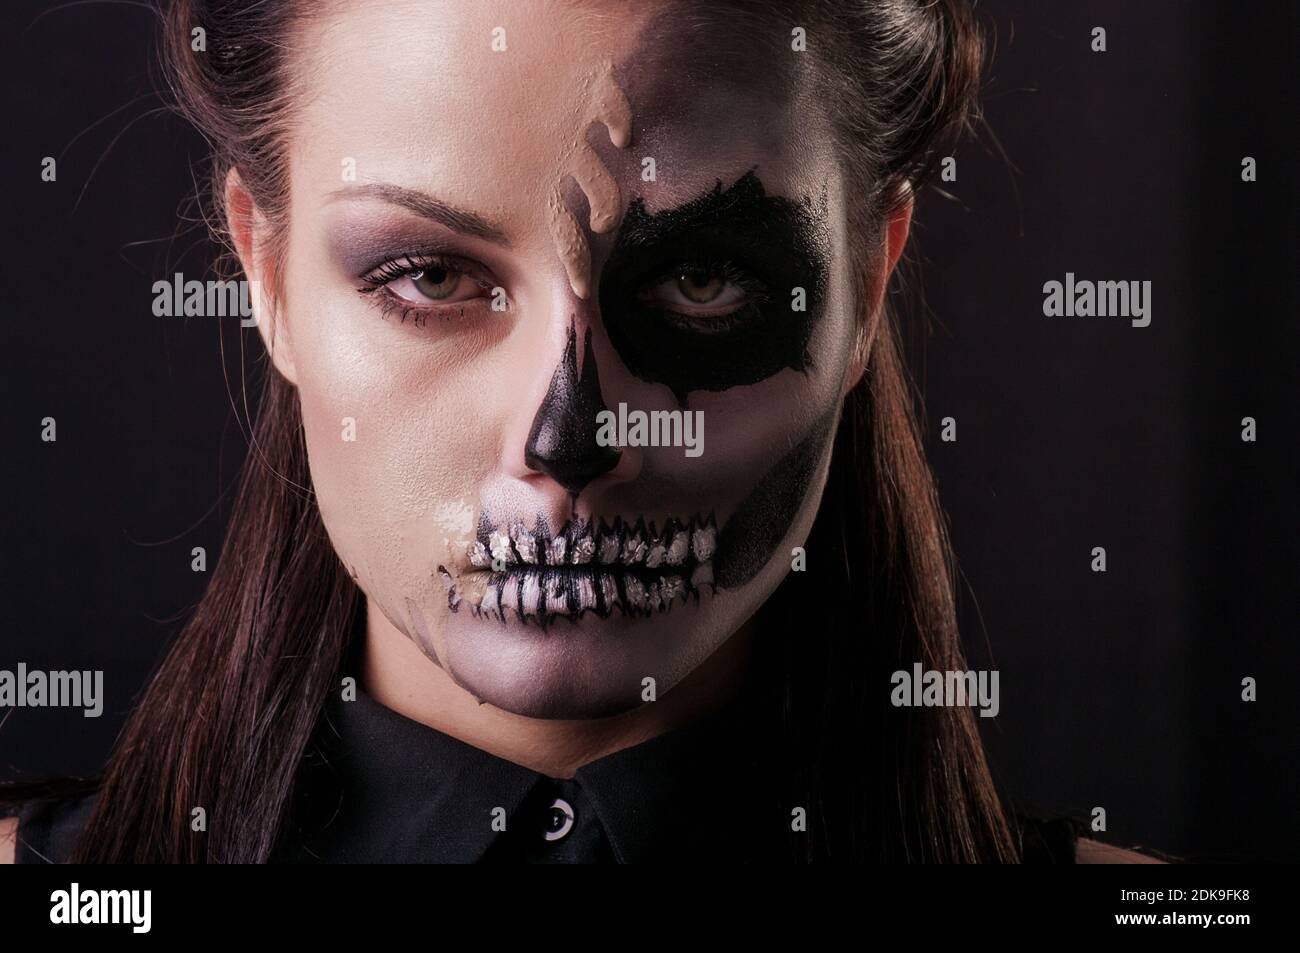 Close-up Portrait Of Young Woman With Spooky Make-up Against Black Background Stock Photo